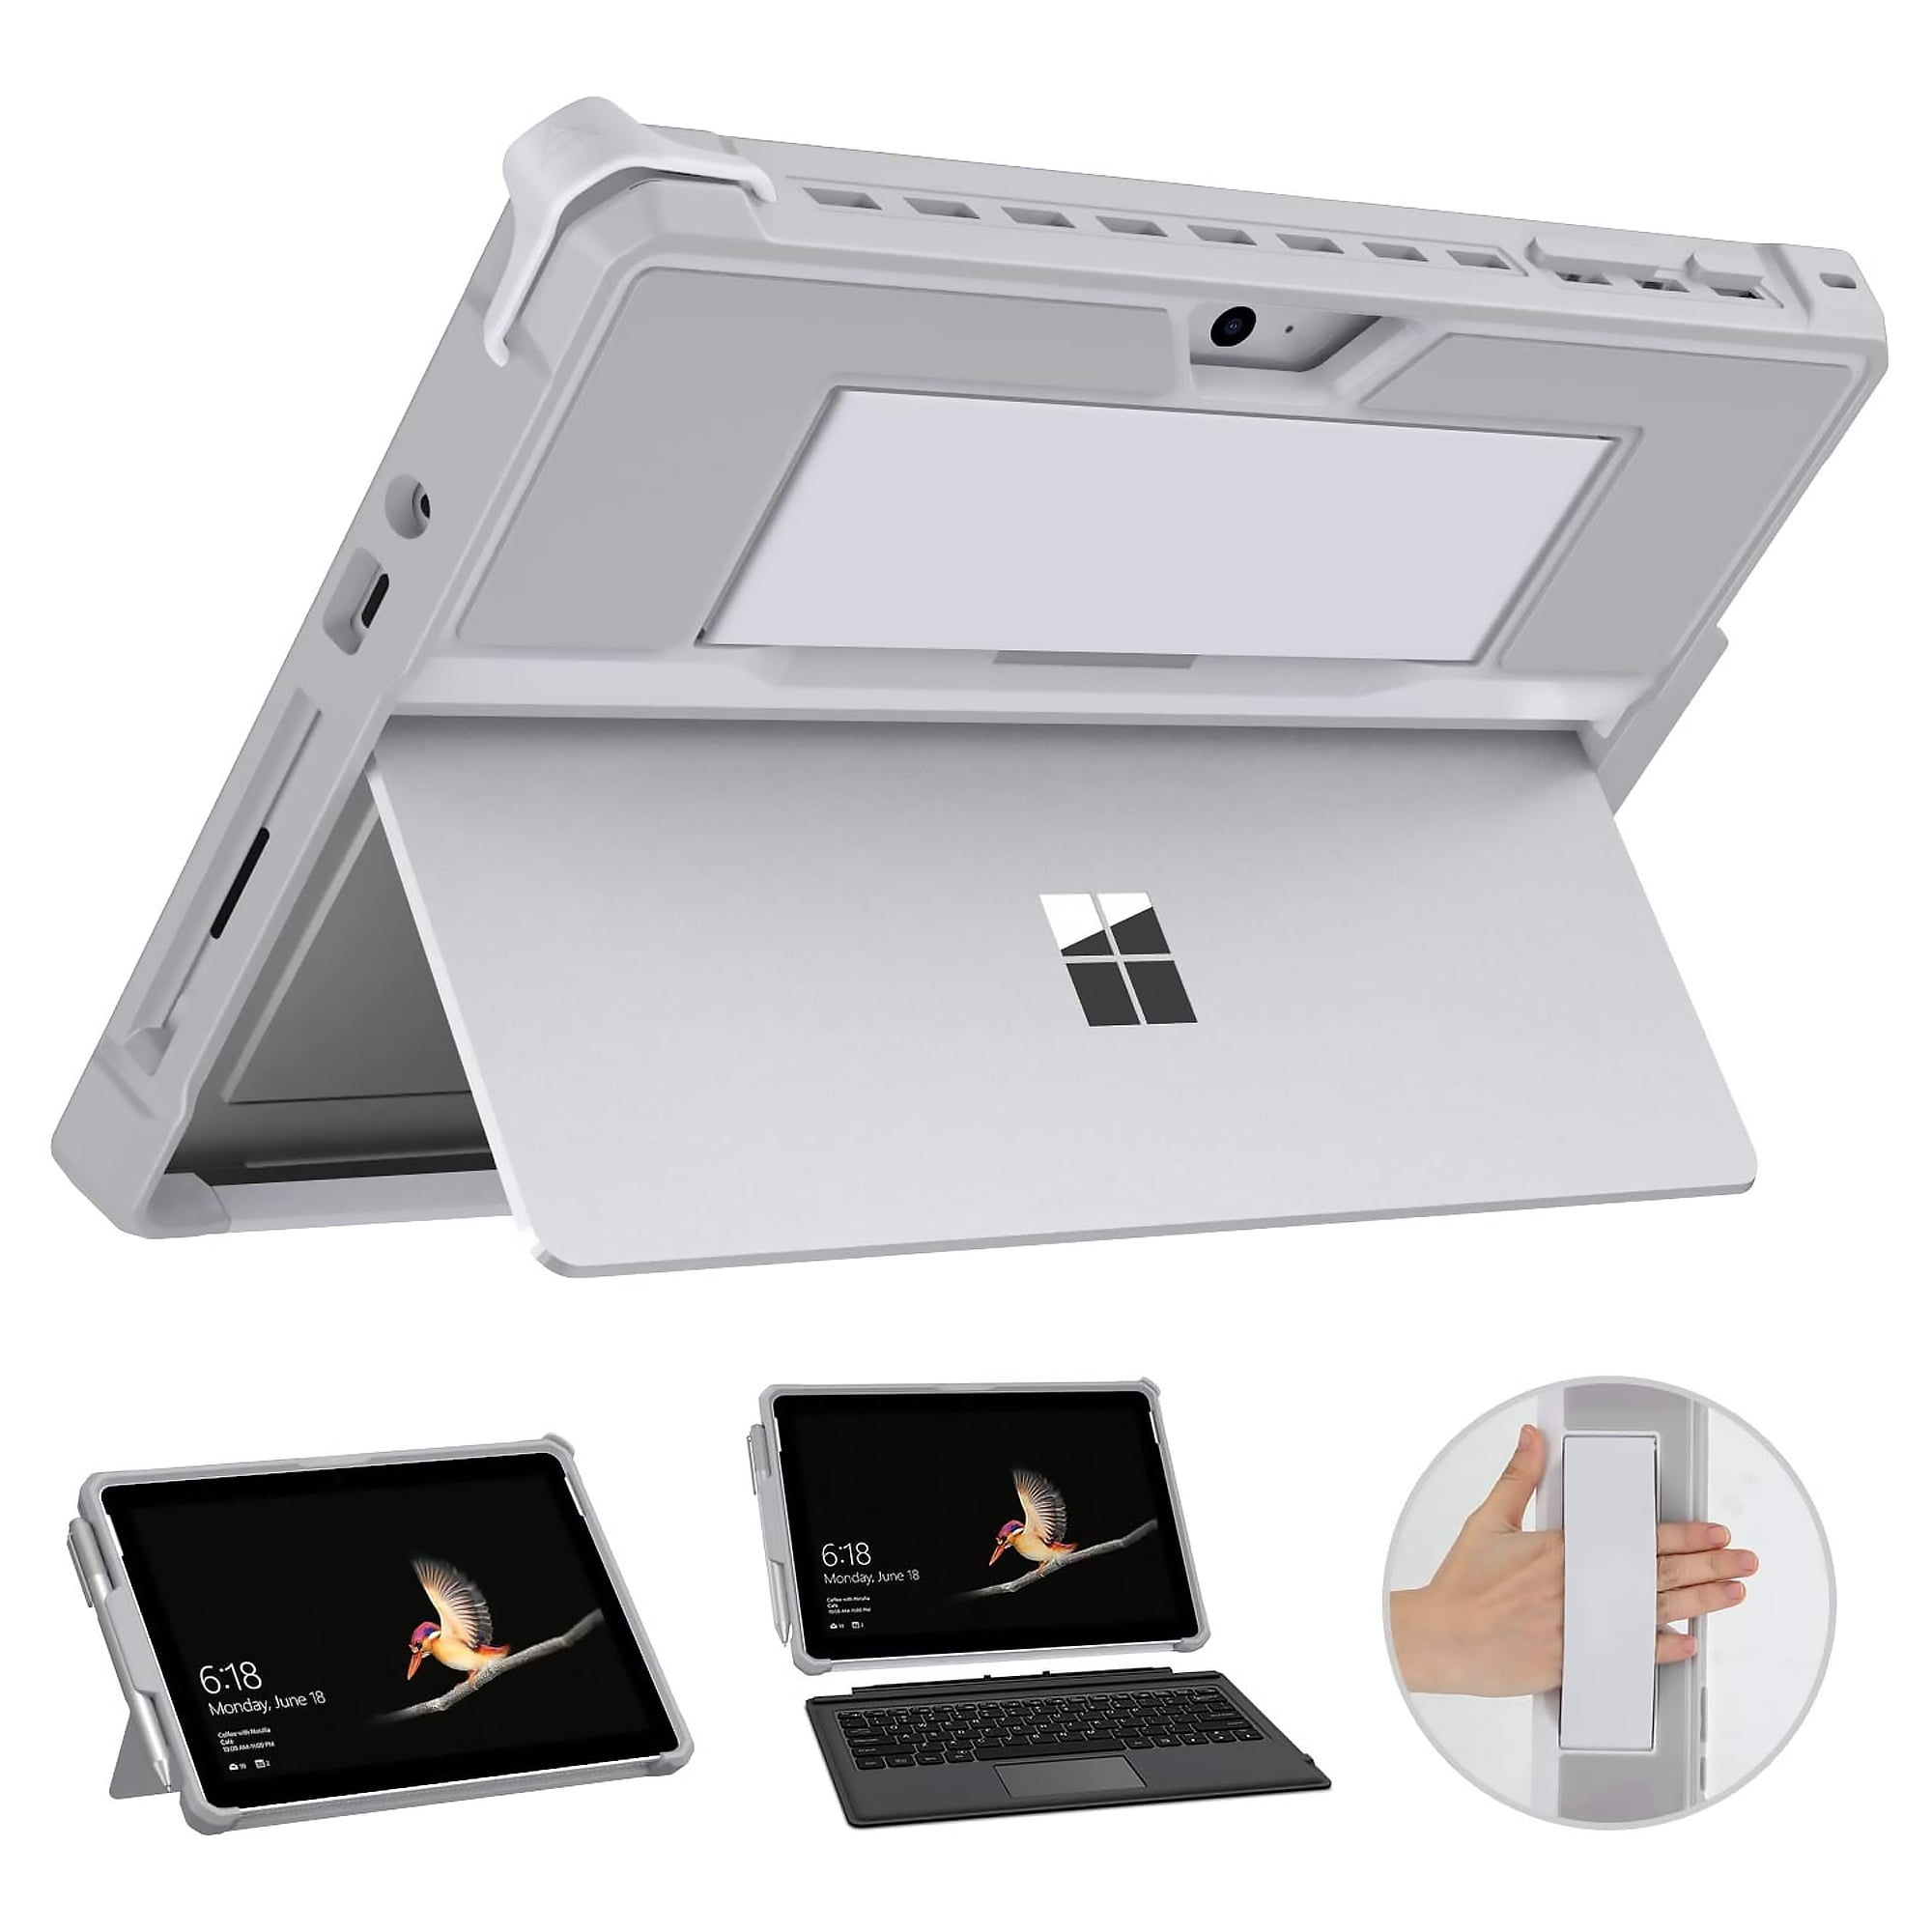 Fast Delivery Case With Keyboard Sky Blue Prime Starter Kit Microsoft Surface Go 10 Tablet Smart Case Free Screen Protector And Stylus Pen Included Available